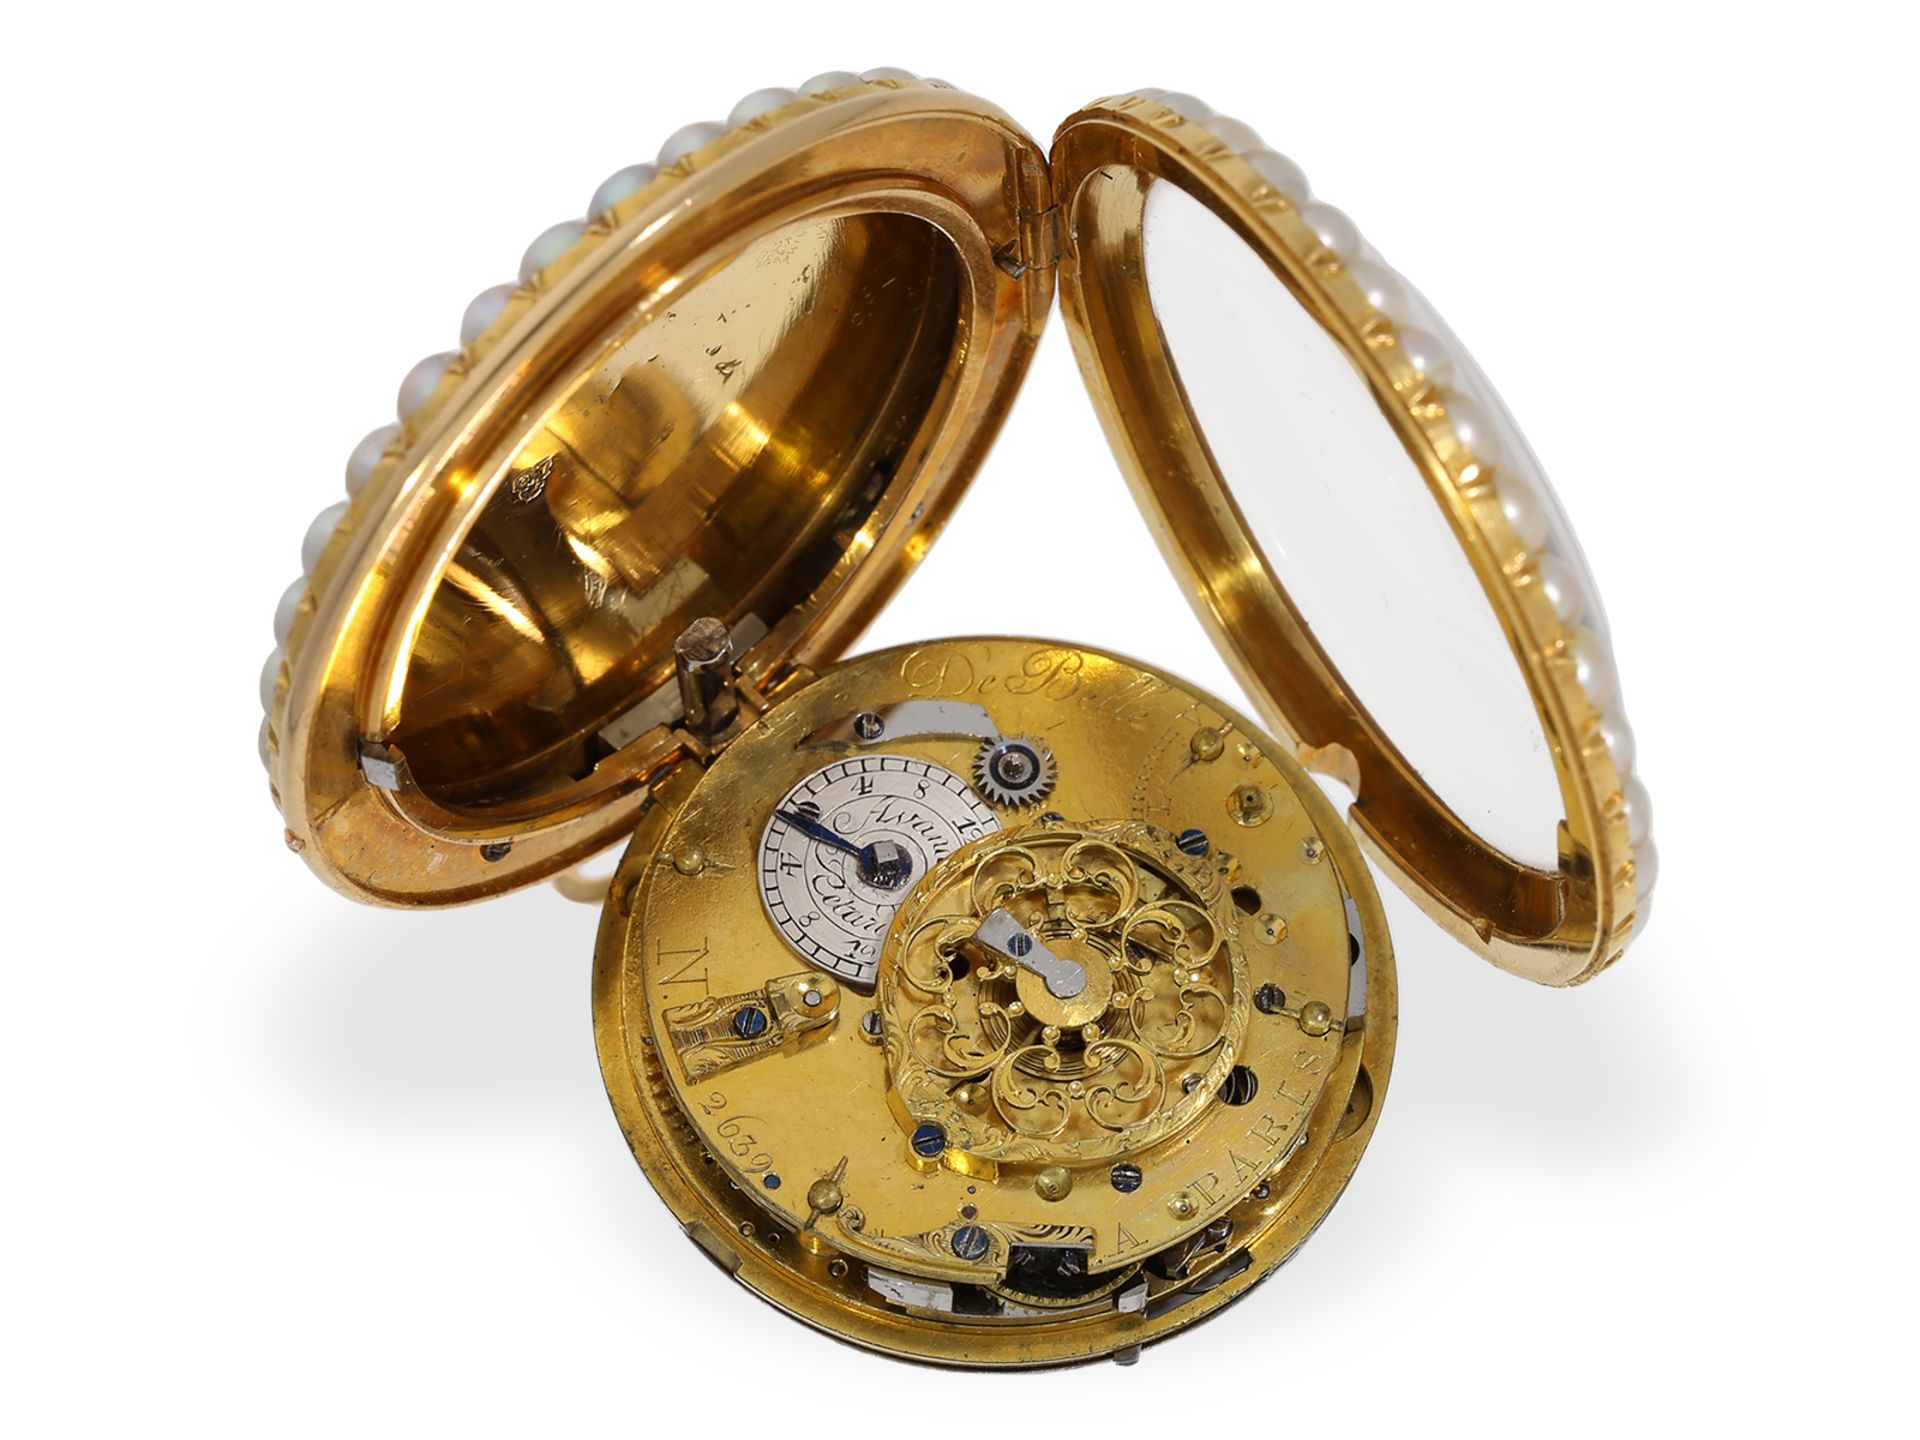 Pocket watch: very fine gold/enamel verge watch set with Oriental pearls and repeater, ca. 1800 - Image 4 of 5